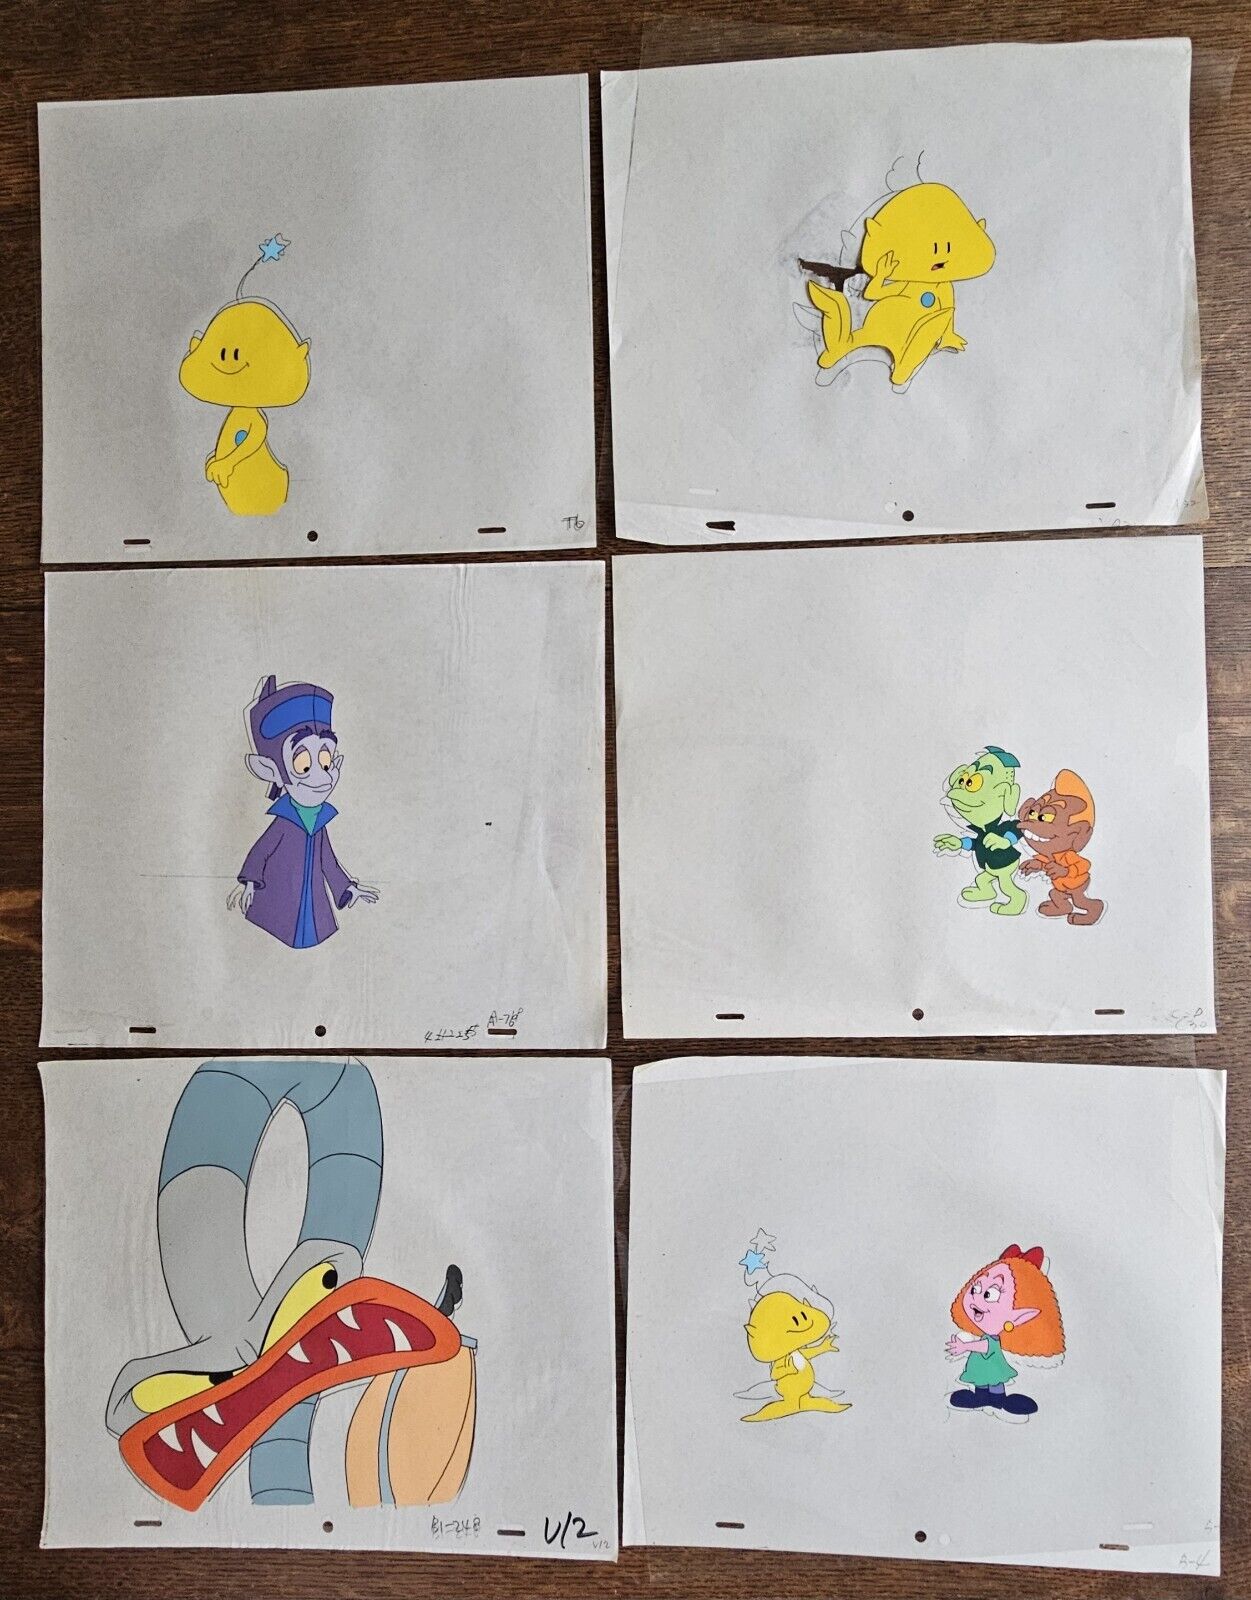 RARE 1992-1993 TWINKLE THE DREAM BEING ANIMATED PRODUCTION CEL CARTOON SERIES